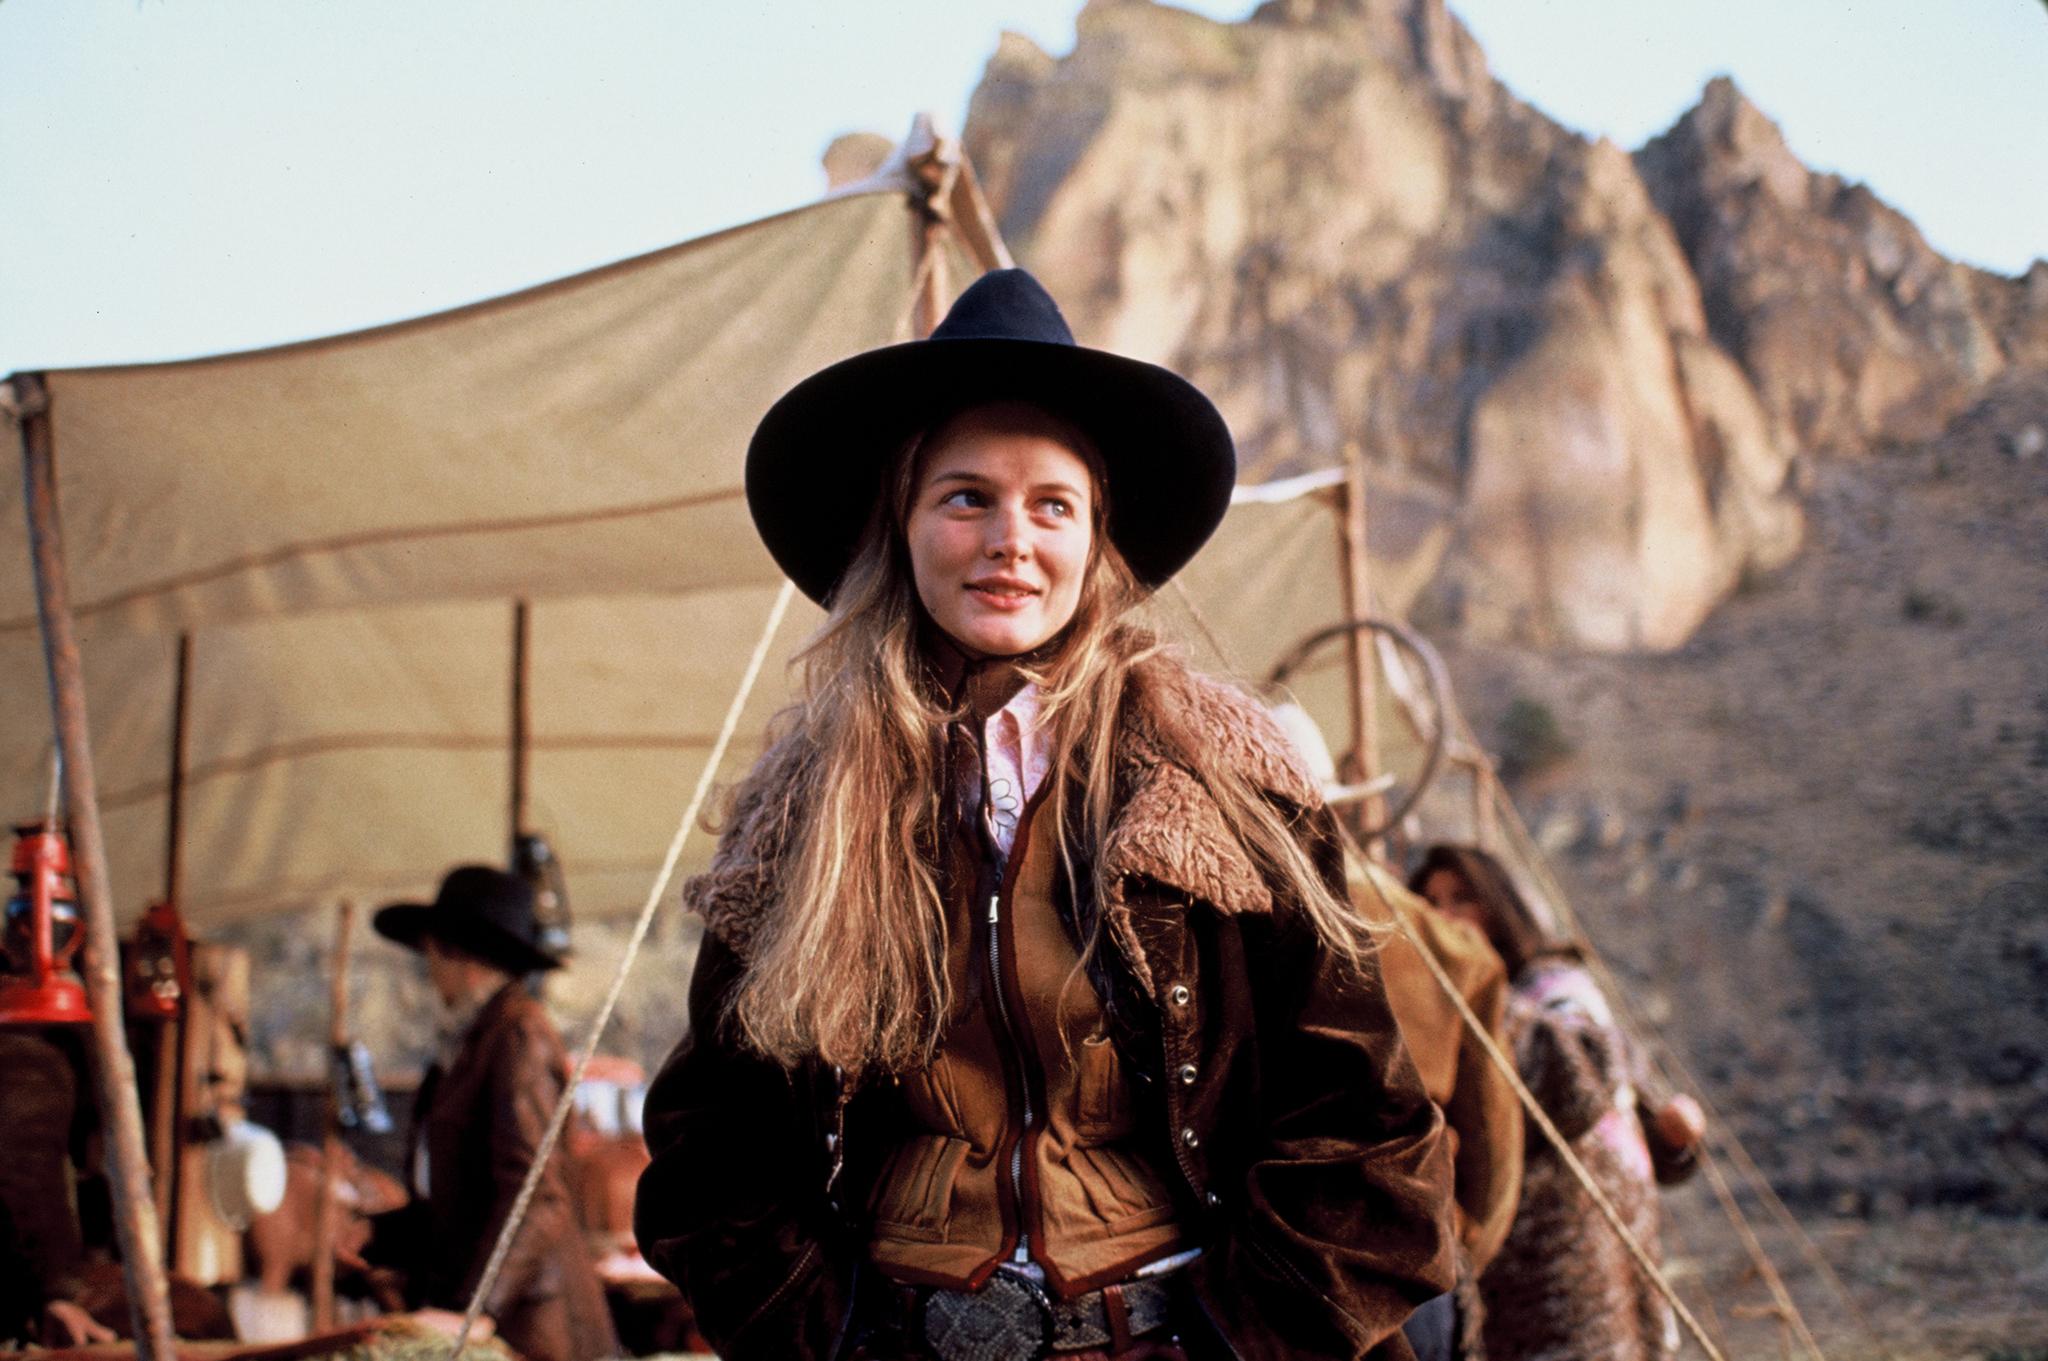 Even Cowgirls Get the Blues (1993)